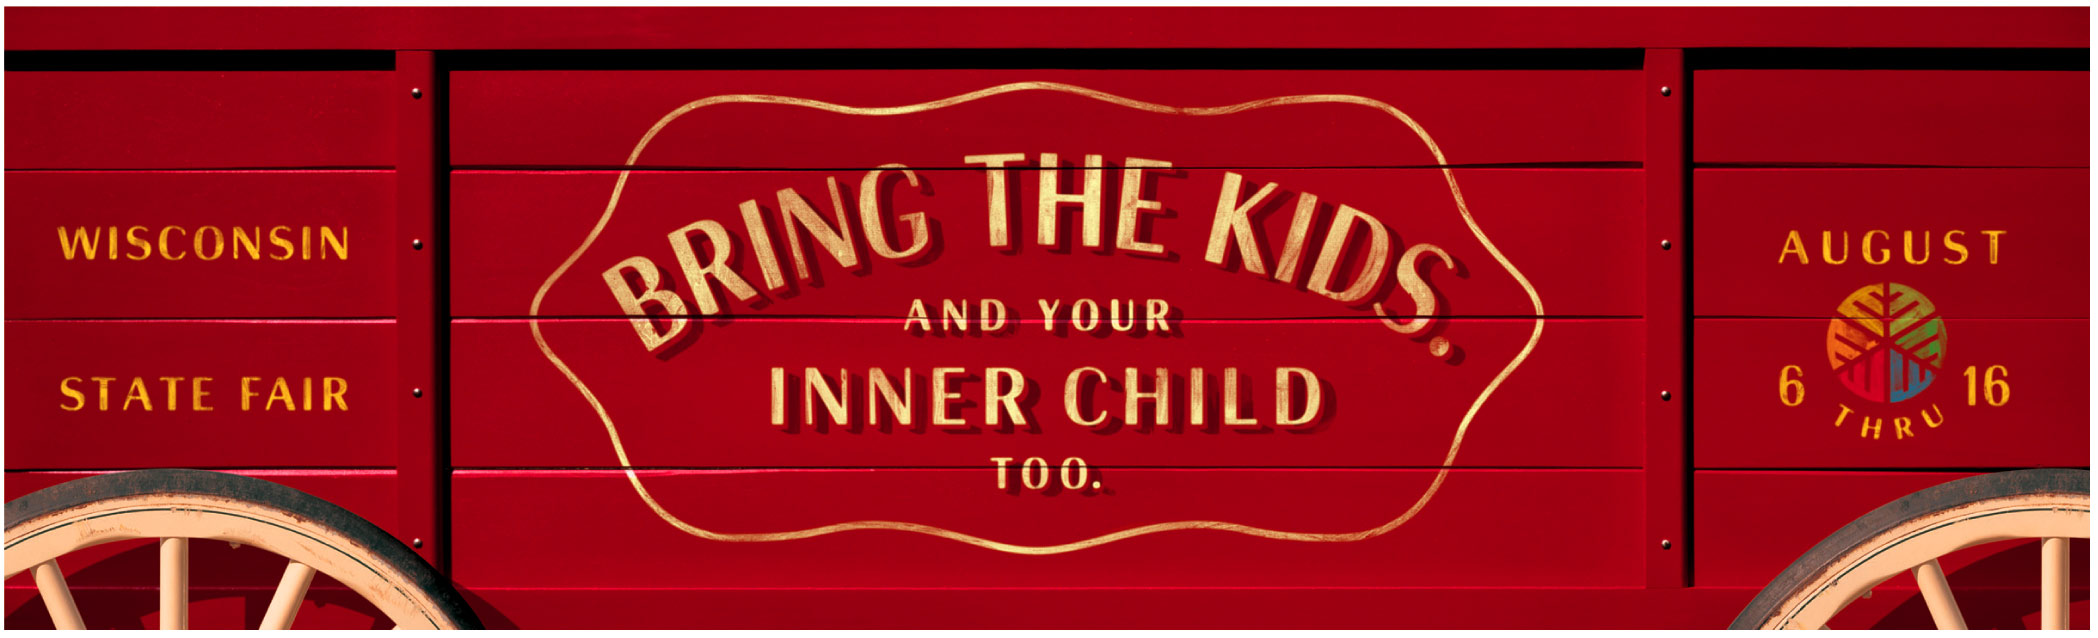 bring-the-kids